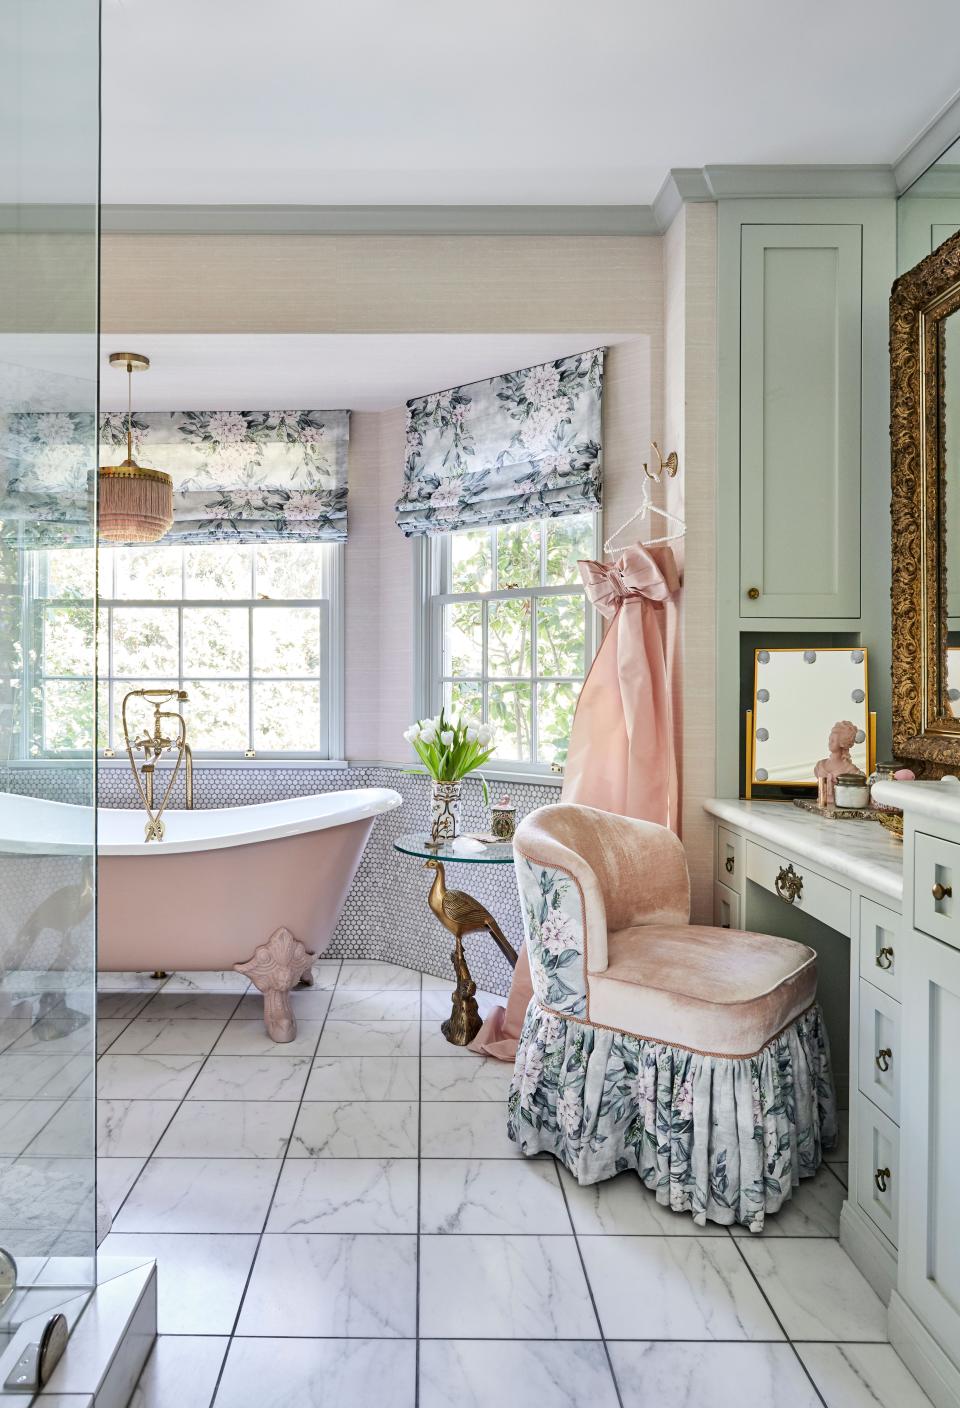 Roxy’s pink bathroom is one of her favorite places in the house. “I spend a lot of time at my little vanity, even just on the phone,” she says. “I love my floral old-lady vanity chair, it’s so cute.” She looked to Osborne & Little for the drapery and chair fabric.